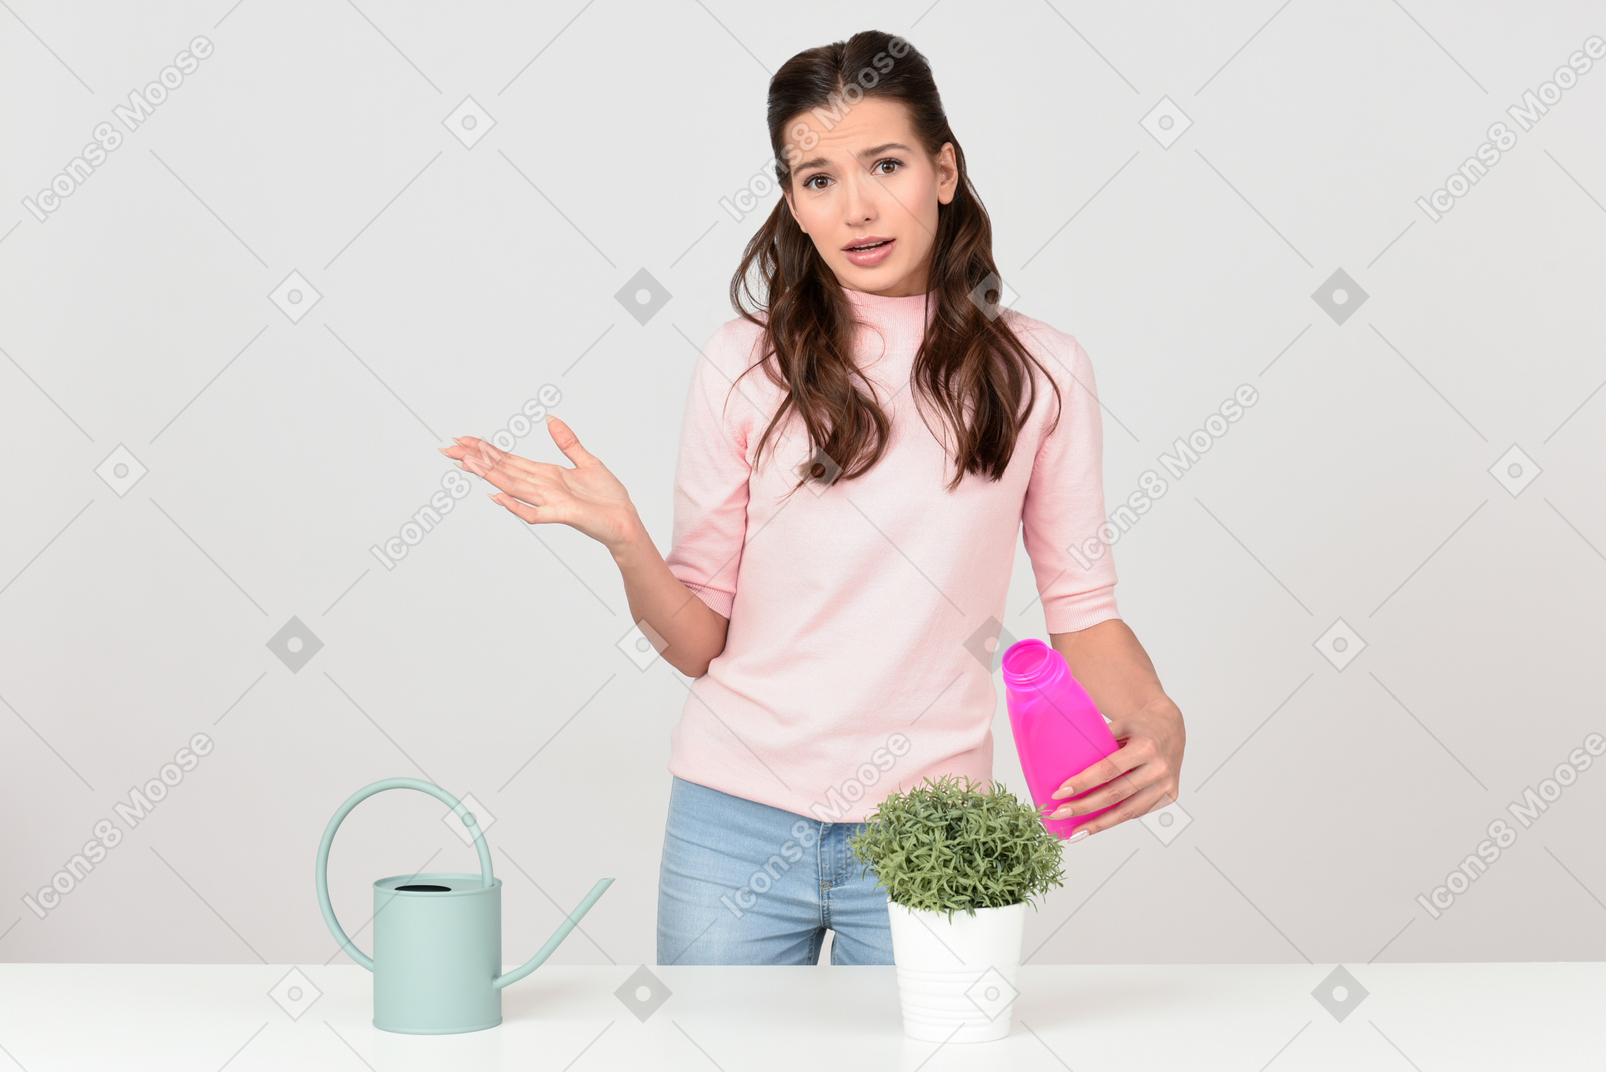 Attractive young woman taking care of a houseplant